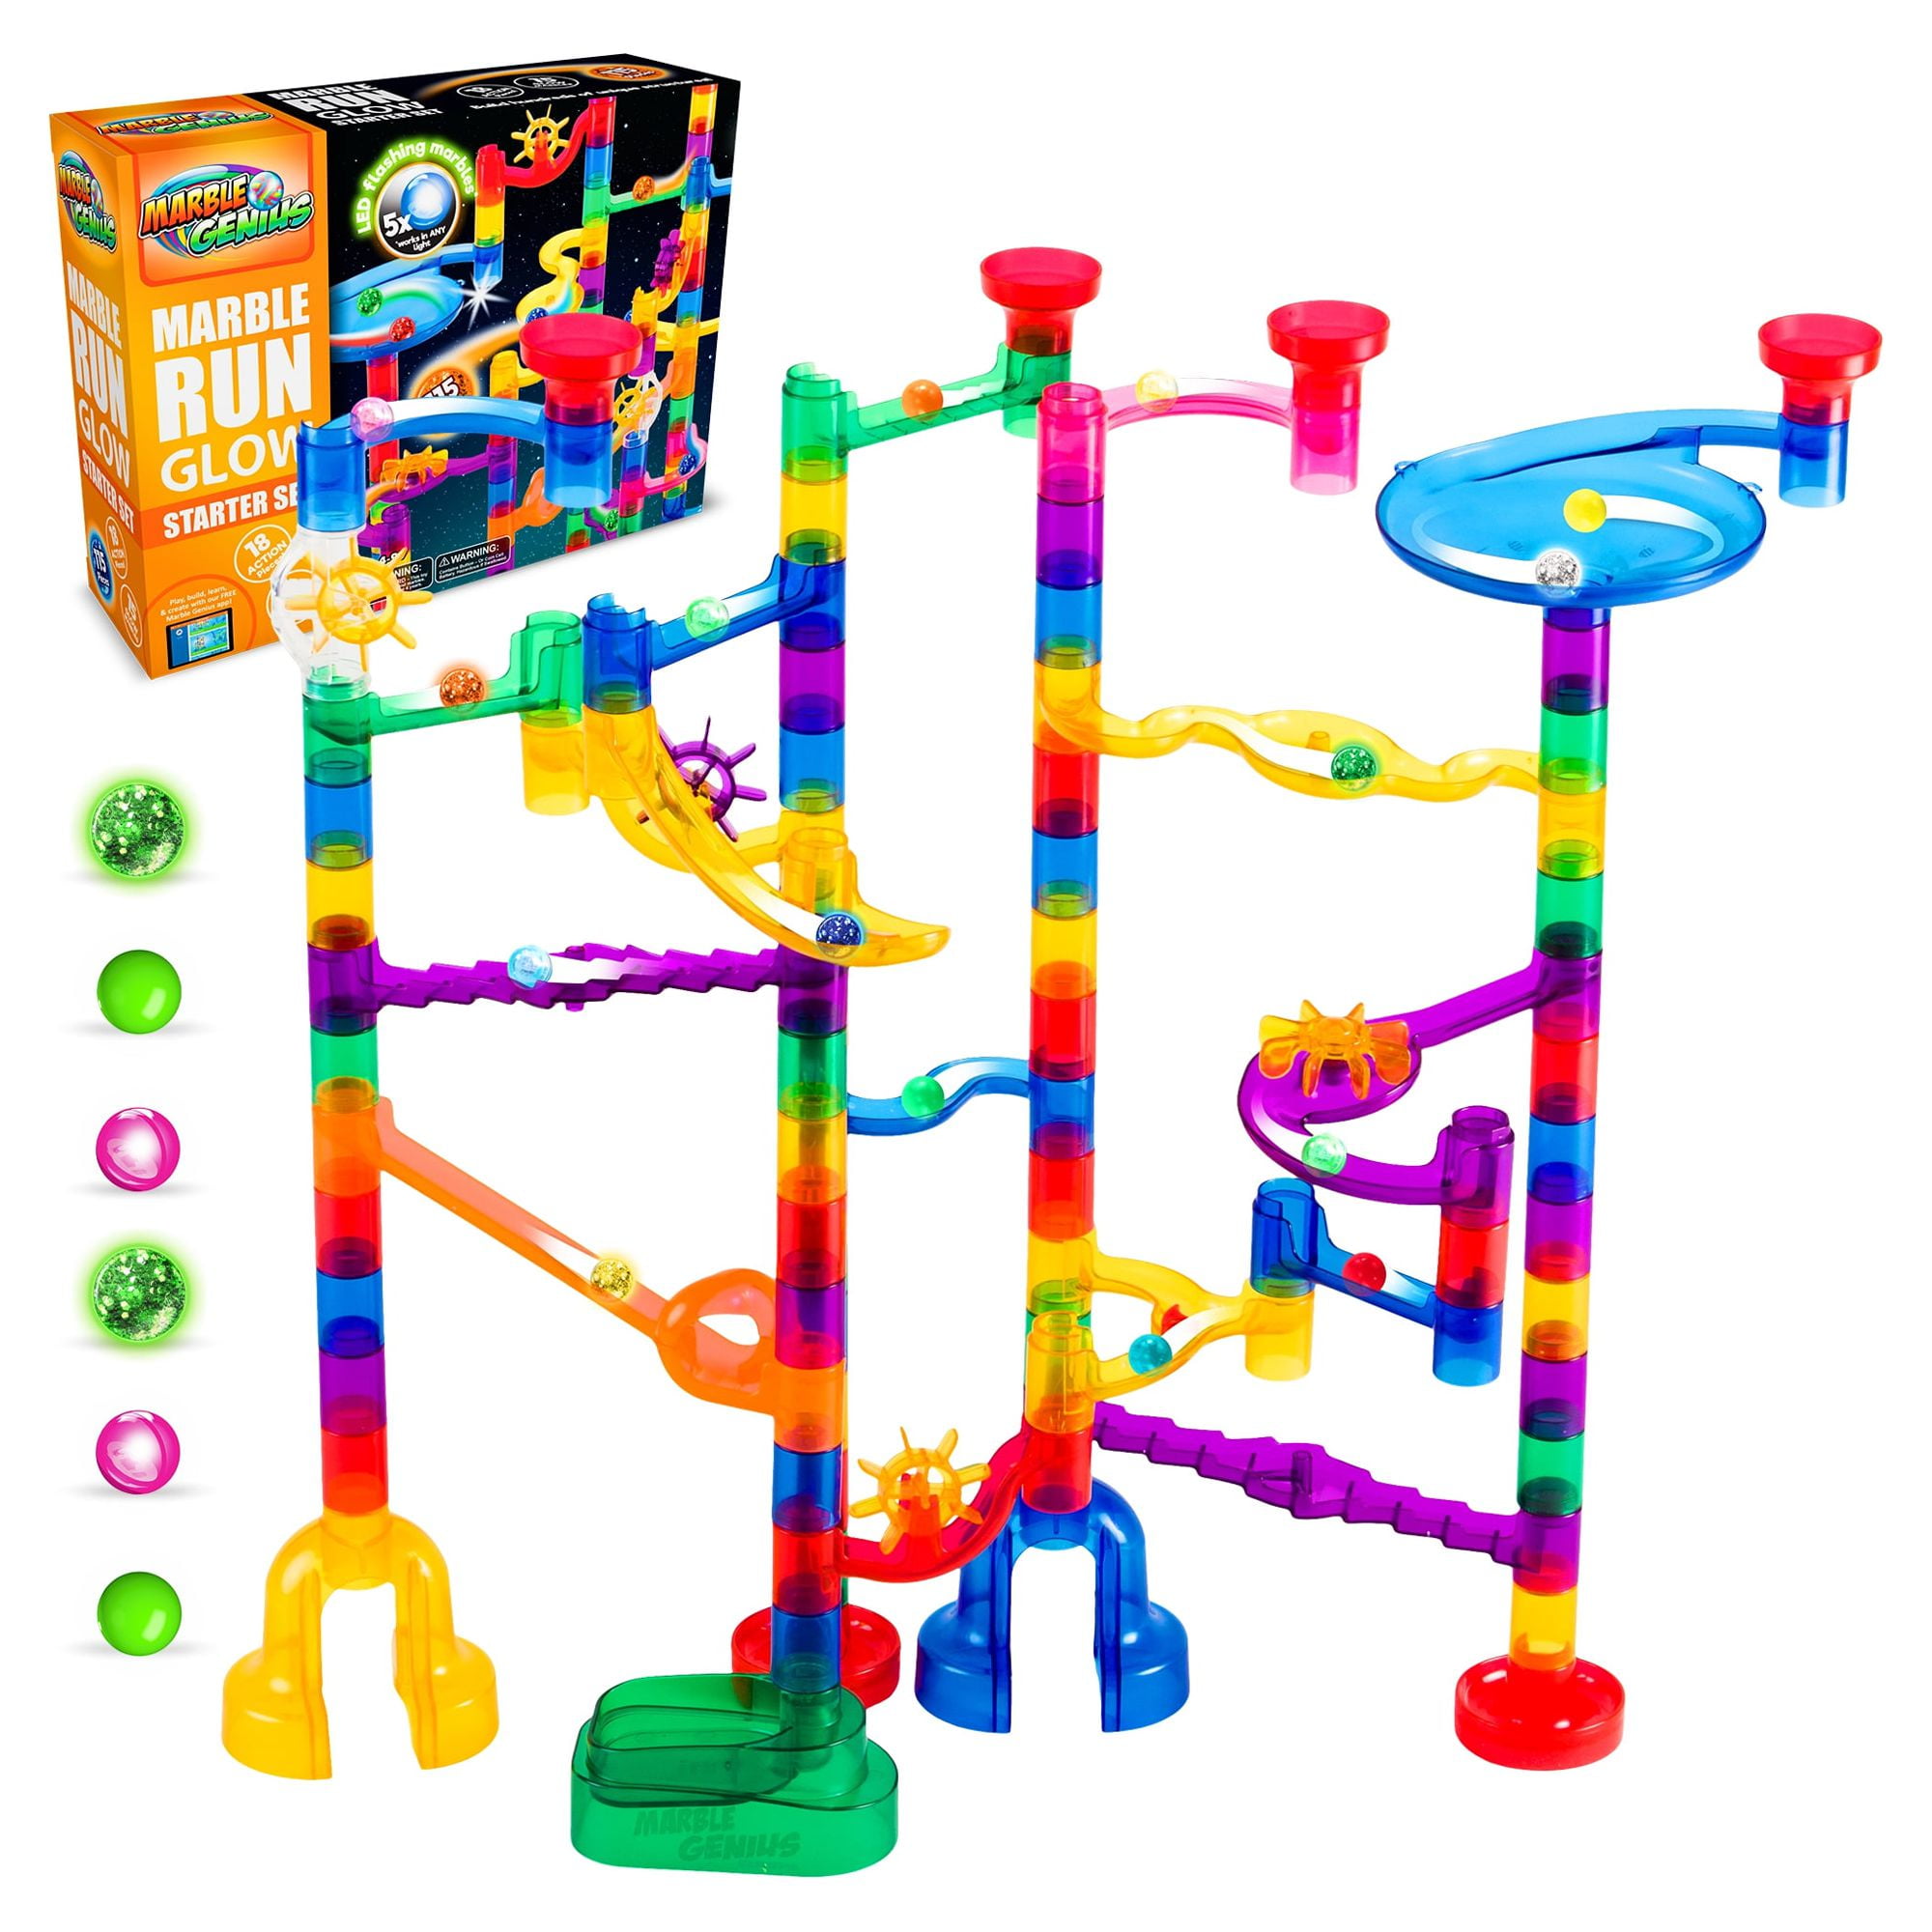 Marble Genius Glow Marble Run Starter Set - 115 Complete Pieces + Free  Instruction App & Full Color Instruction Manual 